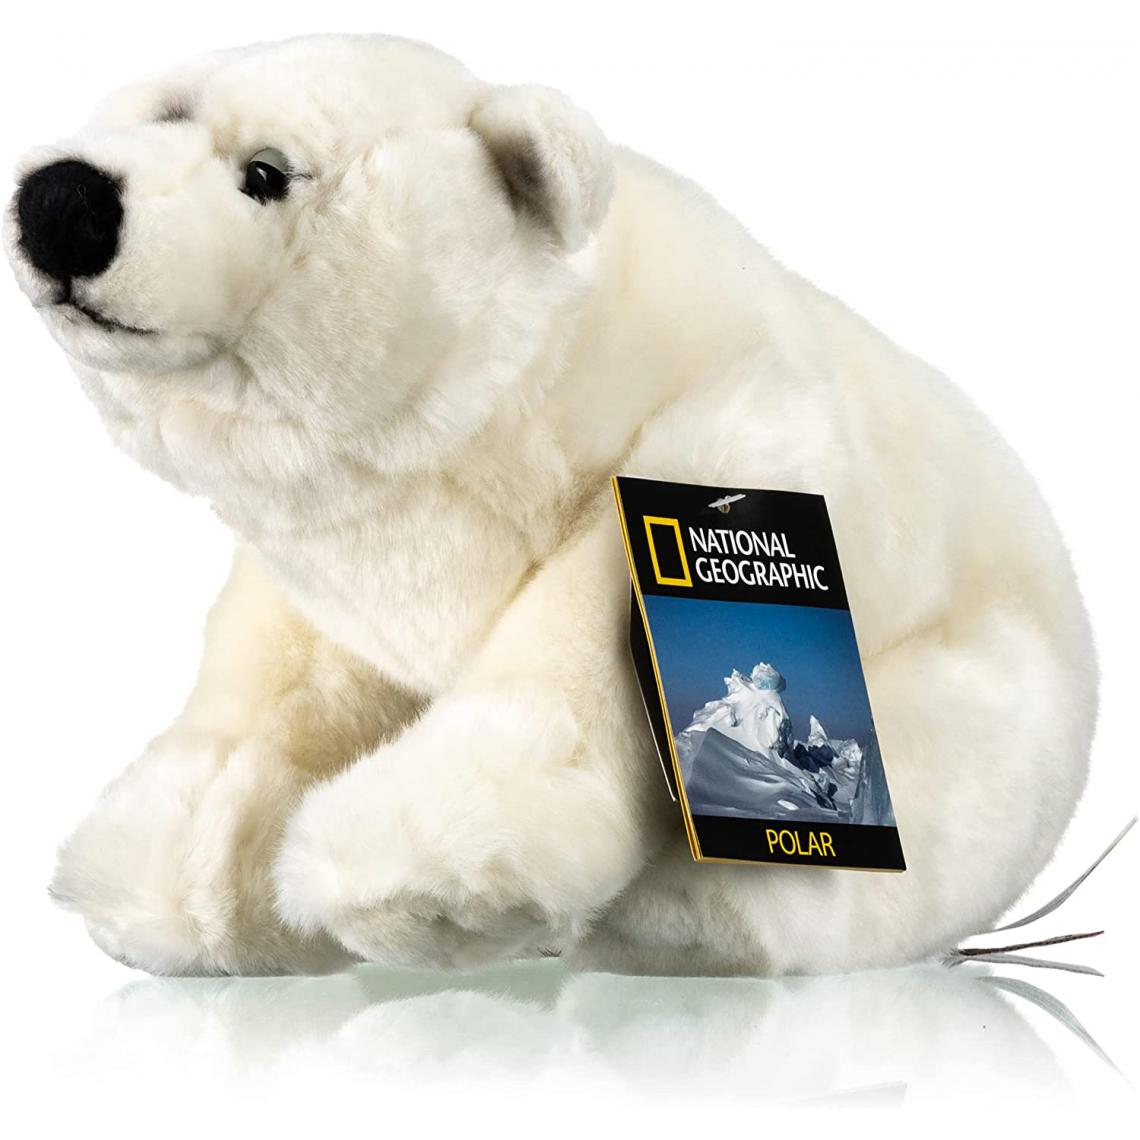 National Geographic - peluche ours de 35 cm blanc - Animaux